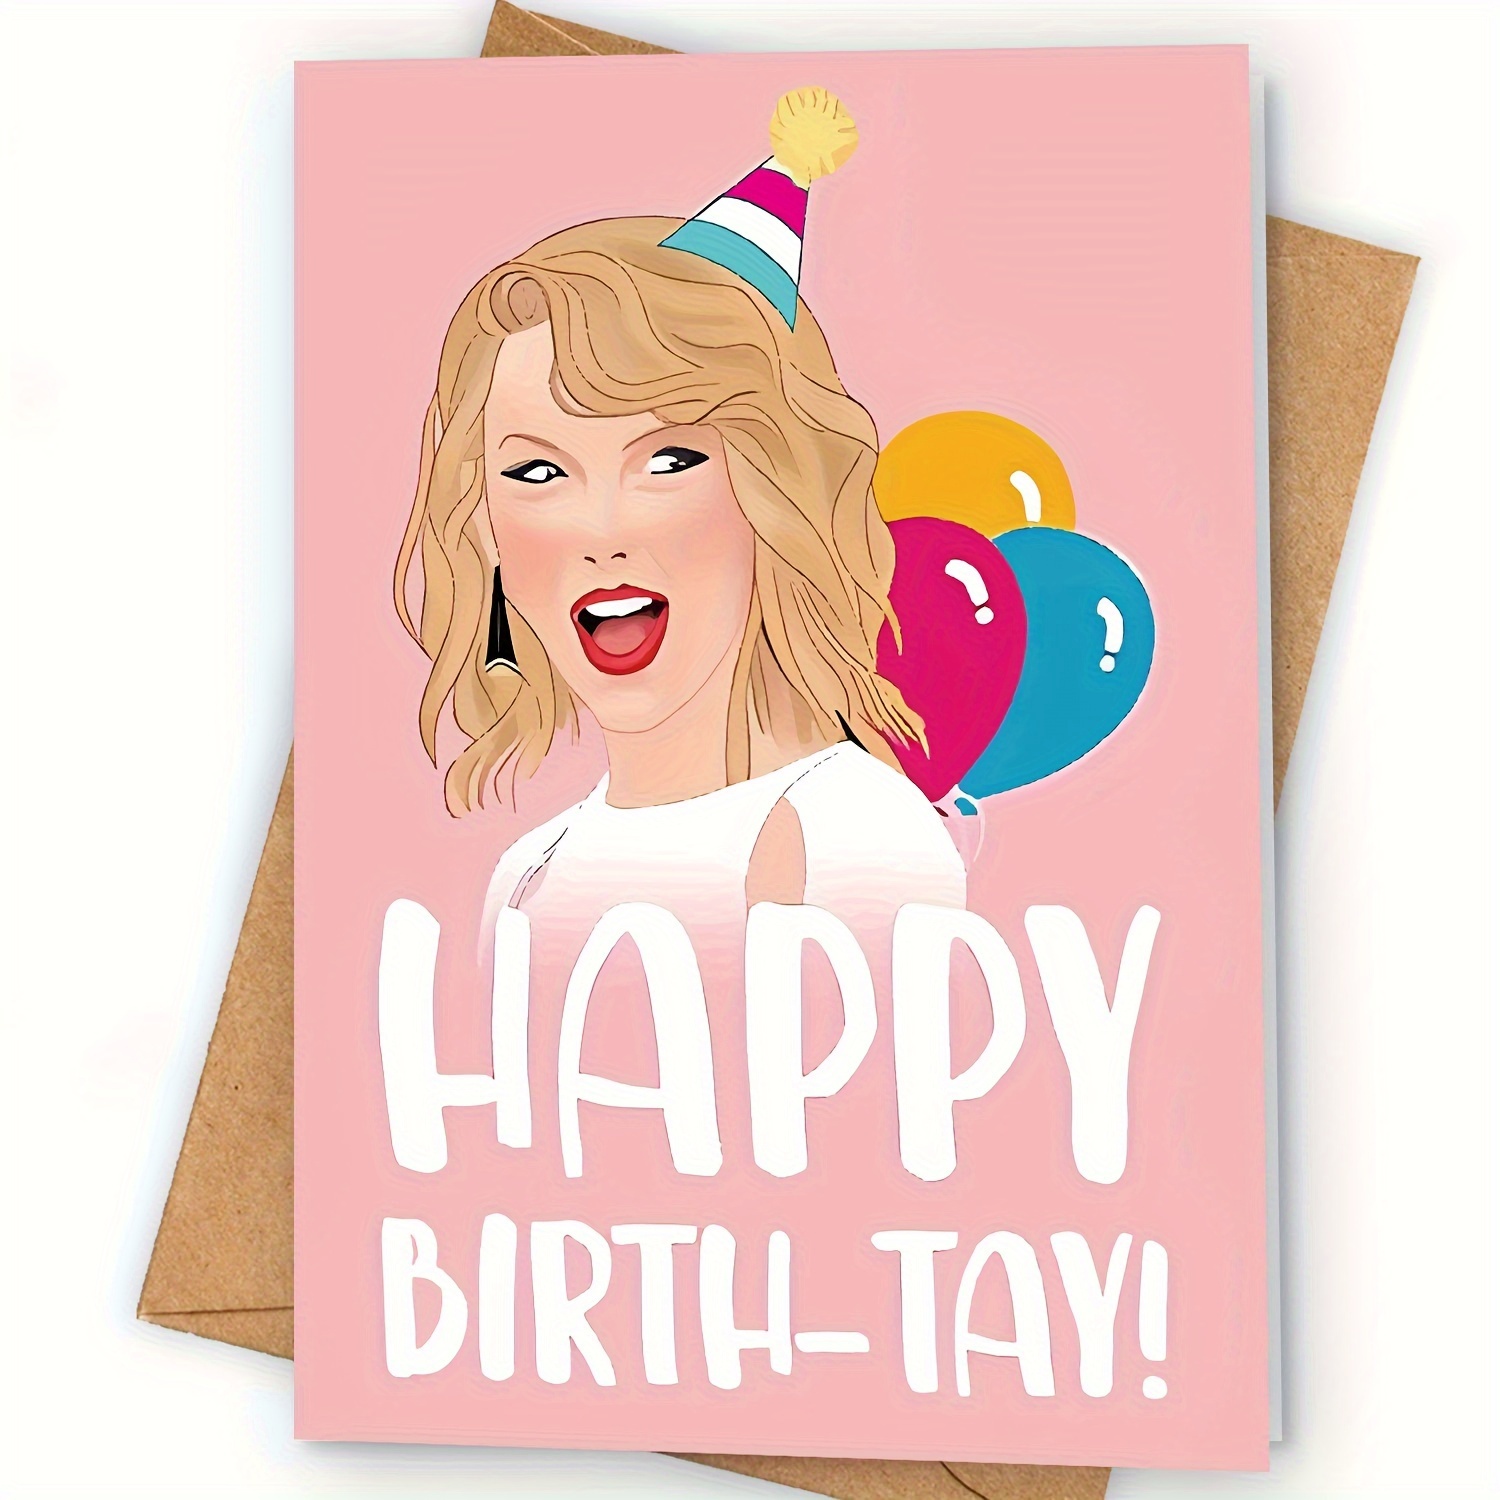 NEW TAYLOR SWIFT Party Decorations Stylish And Vibrant Atmosphere For  Birthday $13.08 - PicClick AU